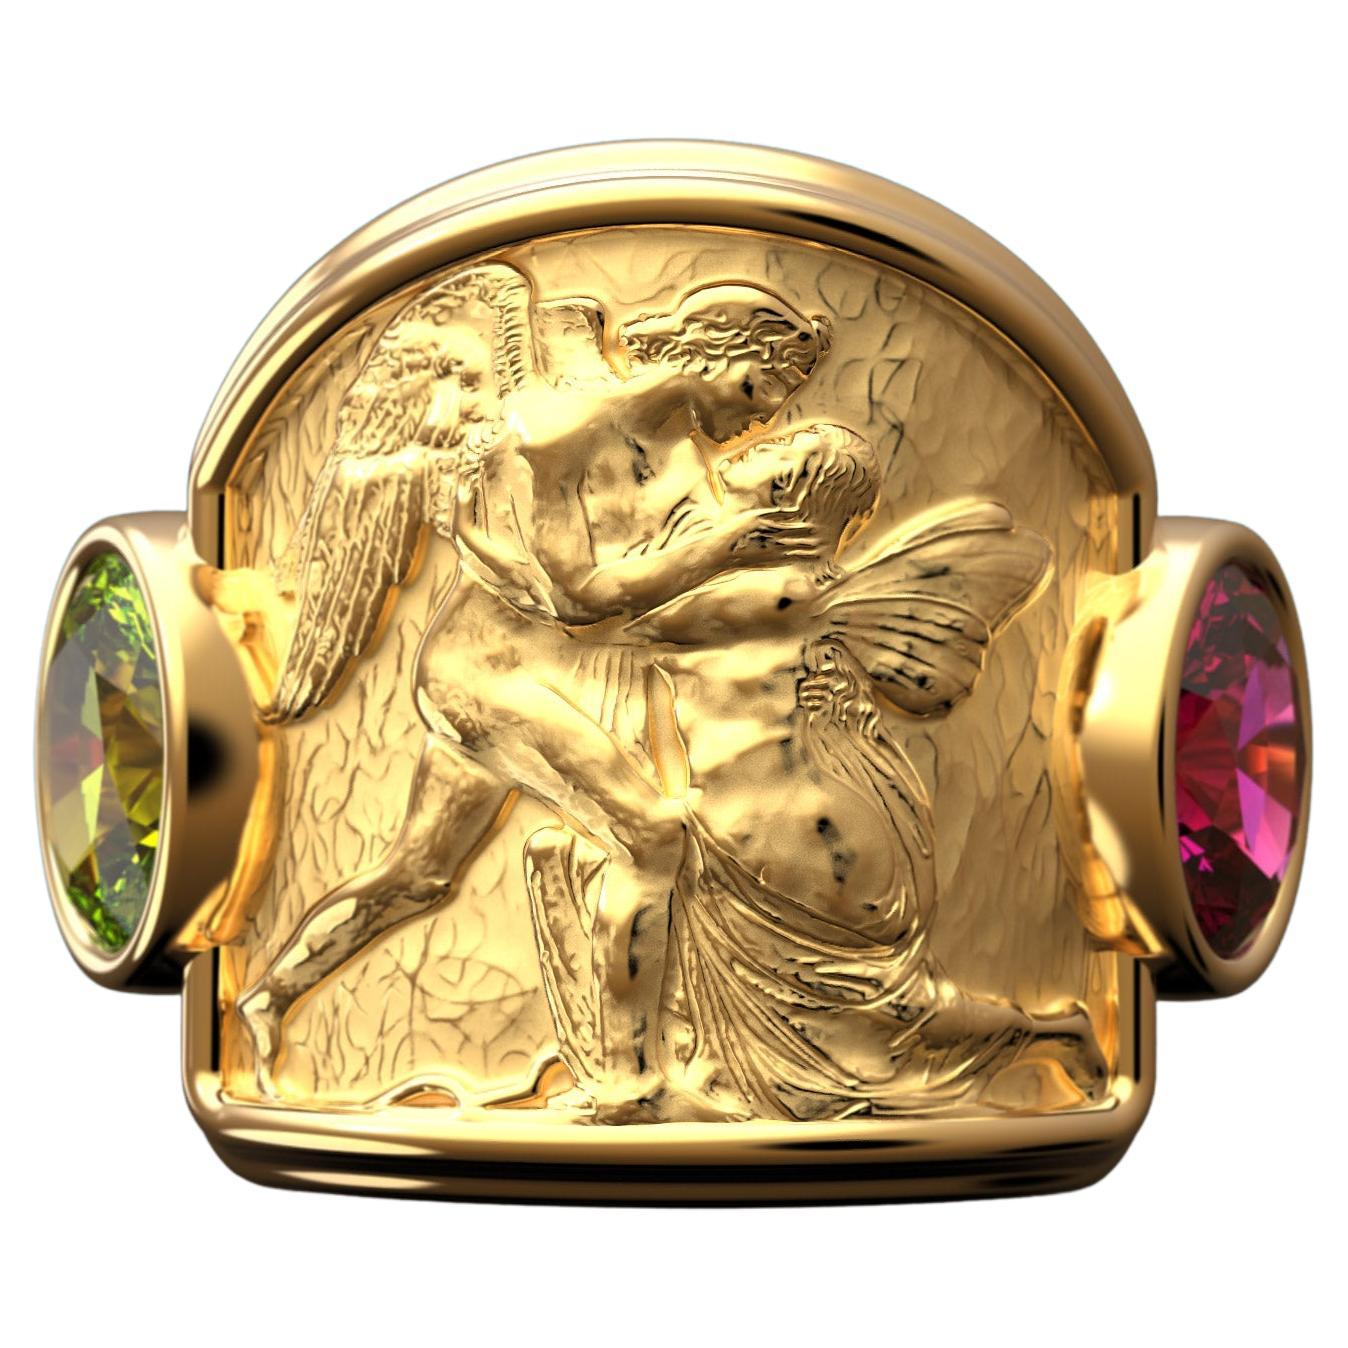 For Sale:  Oltremare Gioielli Sculptural Ring, Love and Psyche 18k Gold Ring, Italian Gold